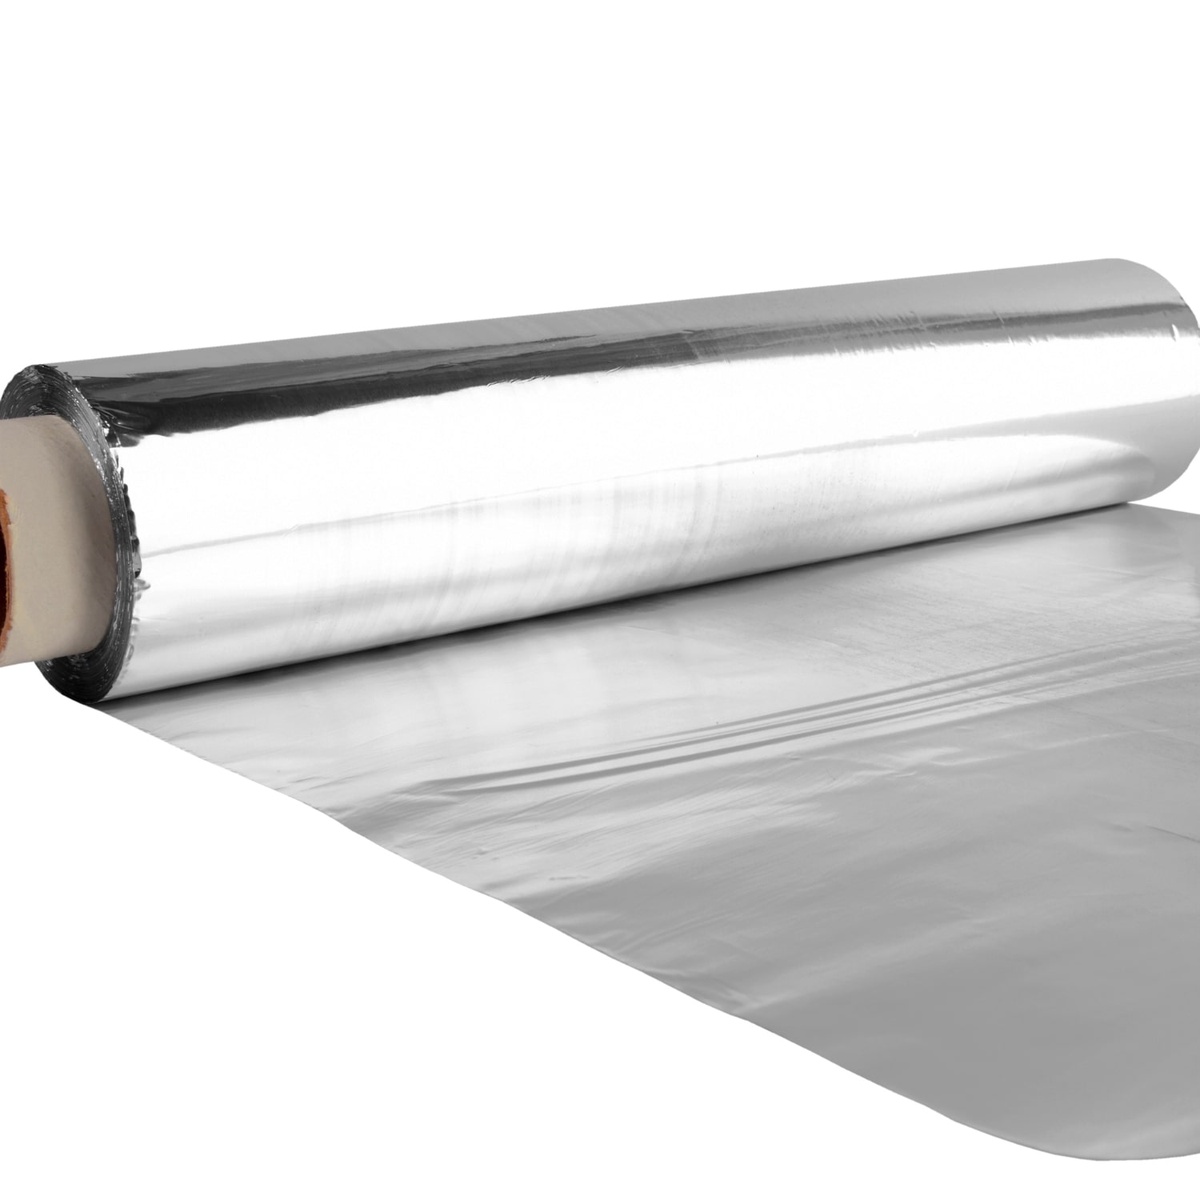 Aluminum Foil Polyester: Applications, Benefits, and Usage Guide